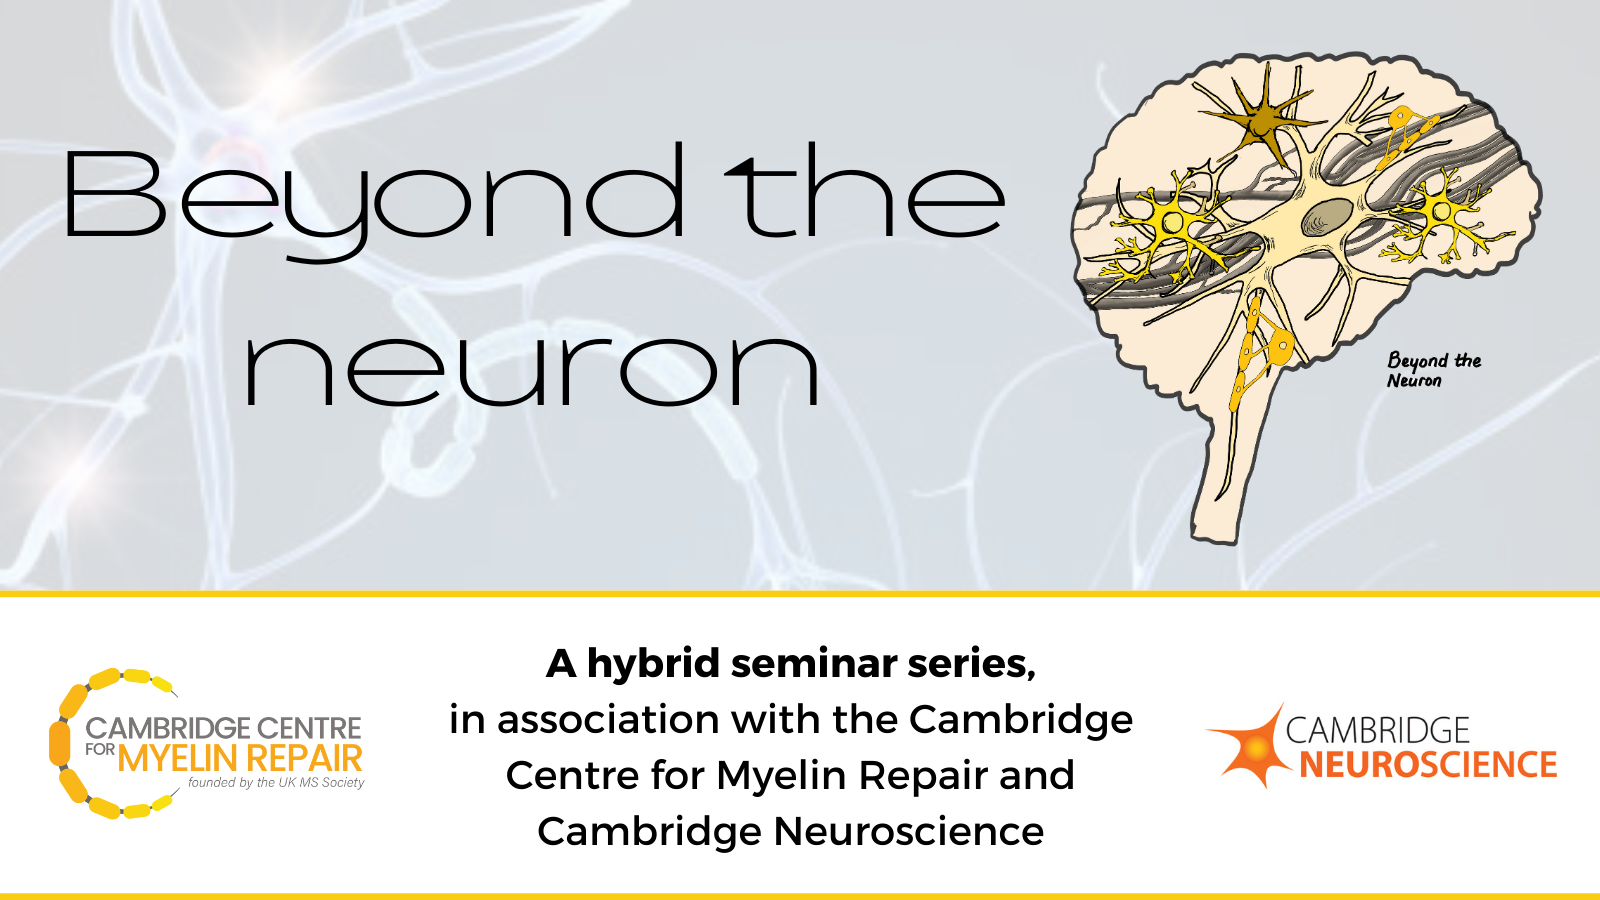 Poster of Beyond the Neuron Seminar Series, in association with Cambridge Centre for Myelin Repair and Cambridge Neuroscience